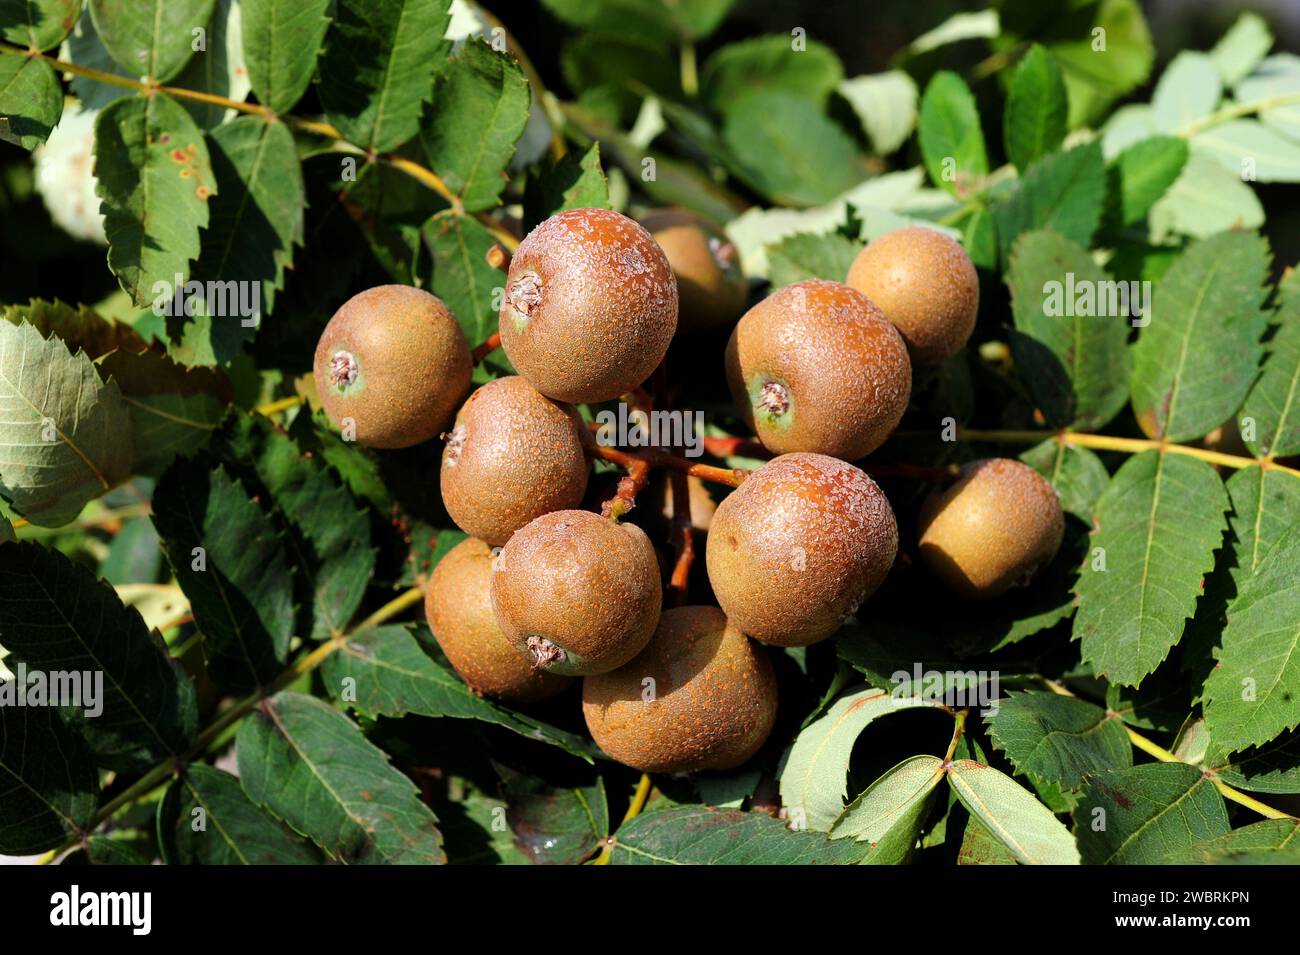 Service tree or sorb tree (Sorbus domestica) is a deciduous tree native to south Europe, north Africa, Caucasus and north Turkey. Fruits and leaves de Stock Photo